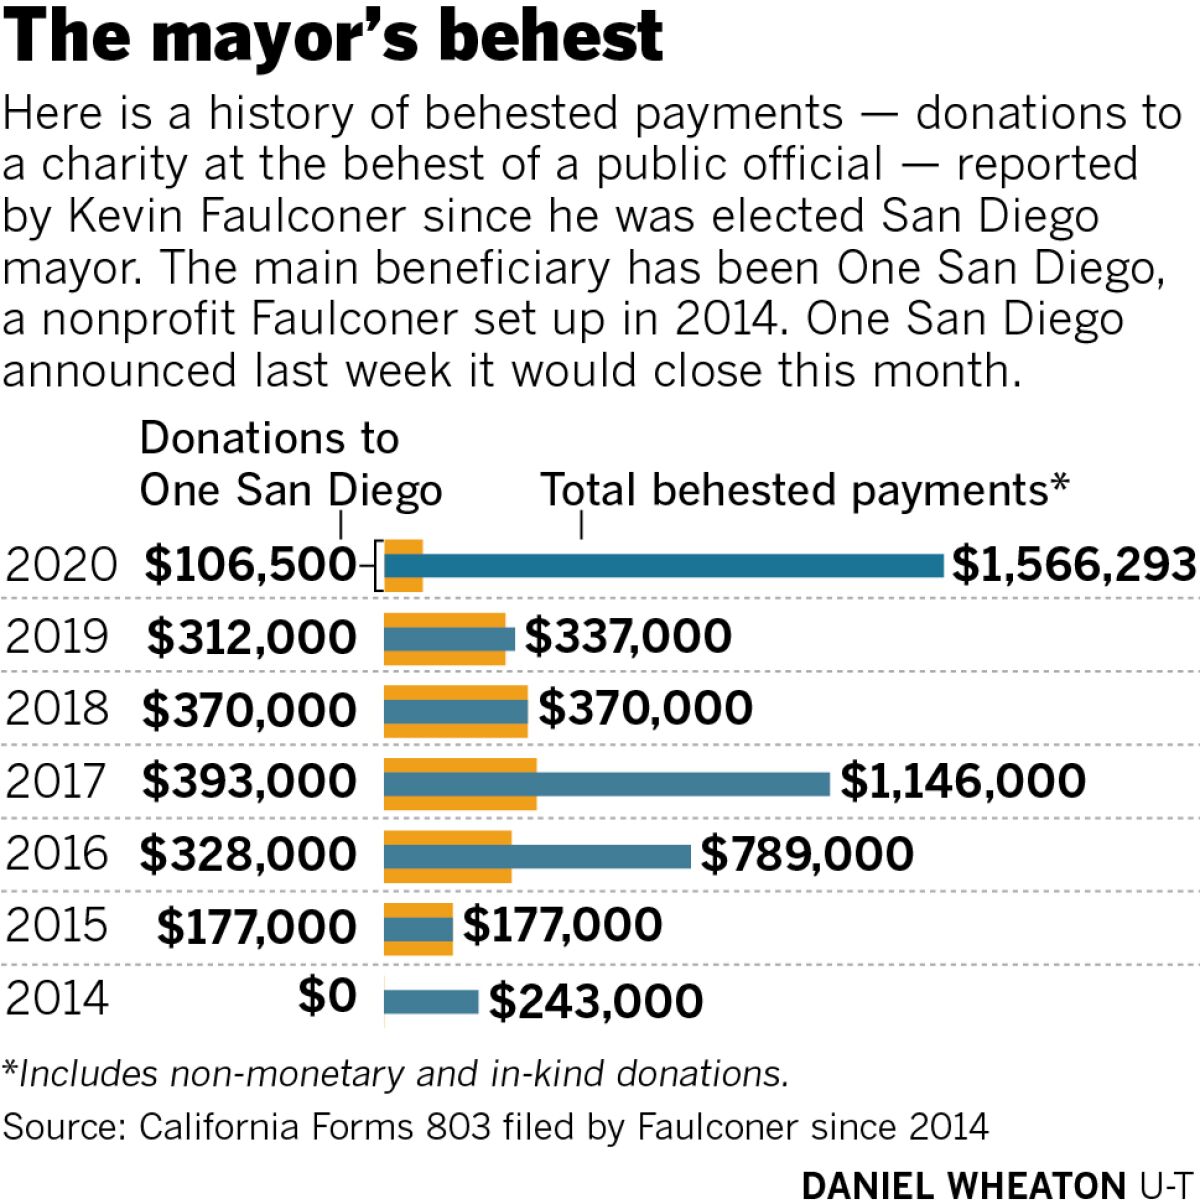 Chart of Mayor Faulconer behest payments